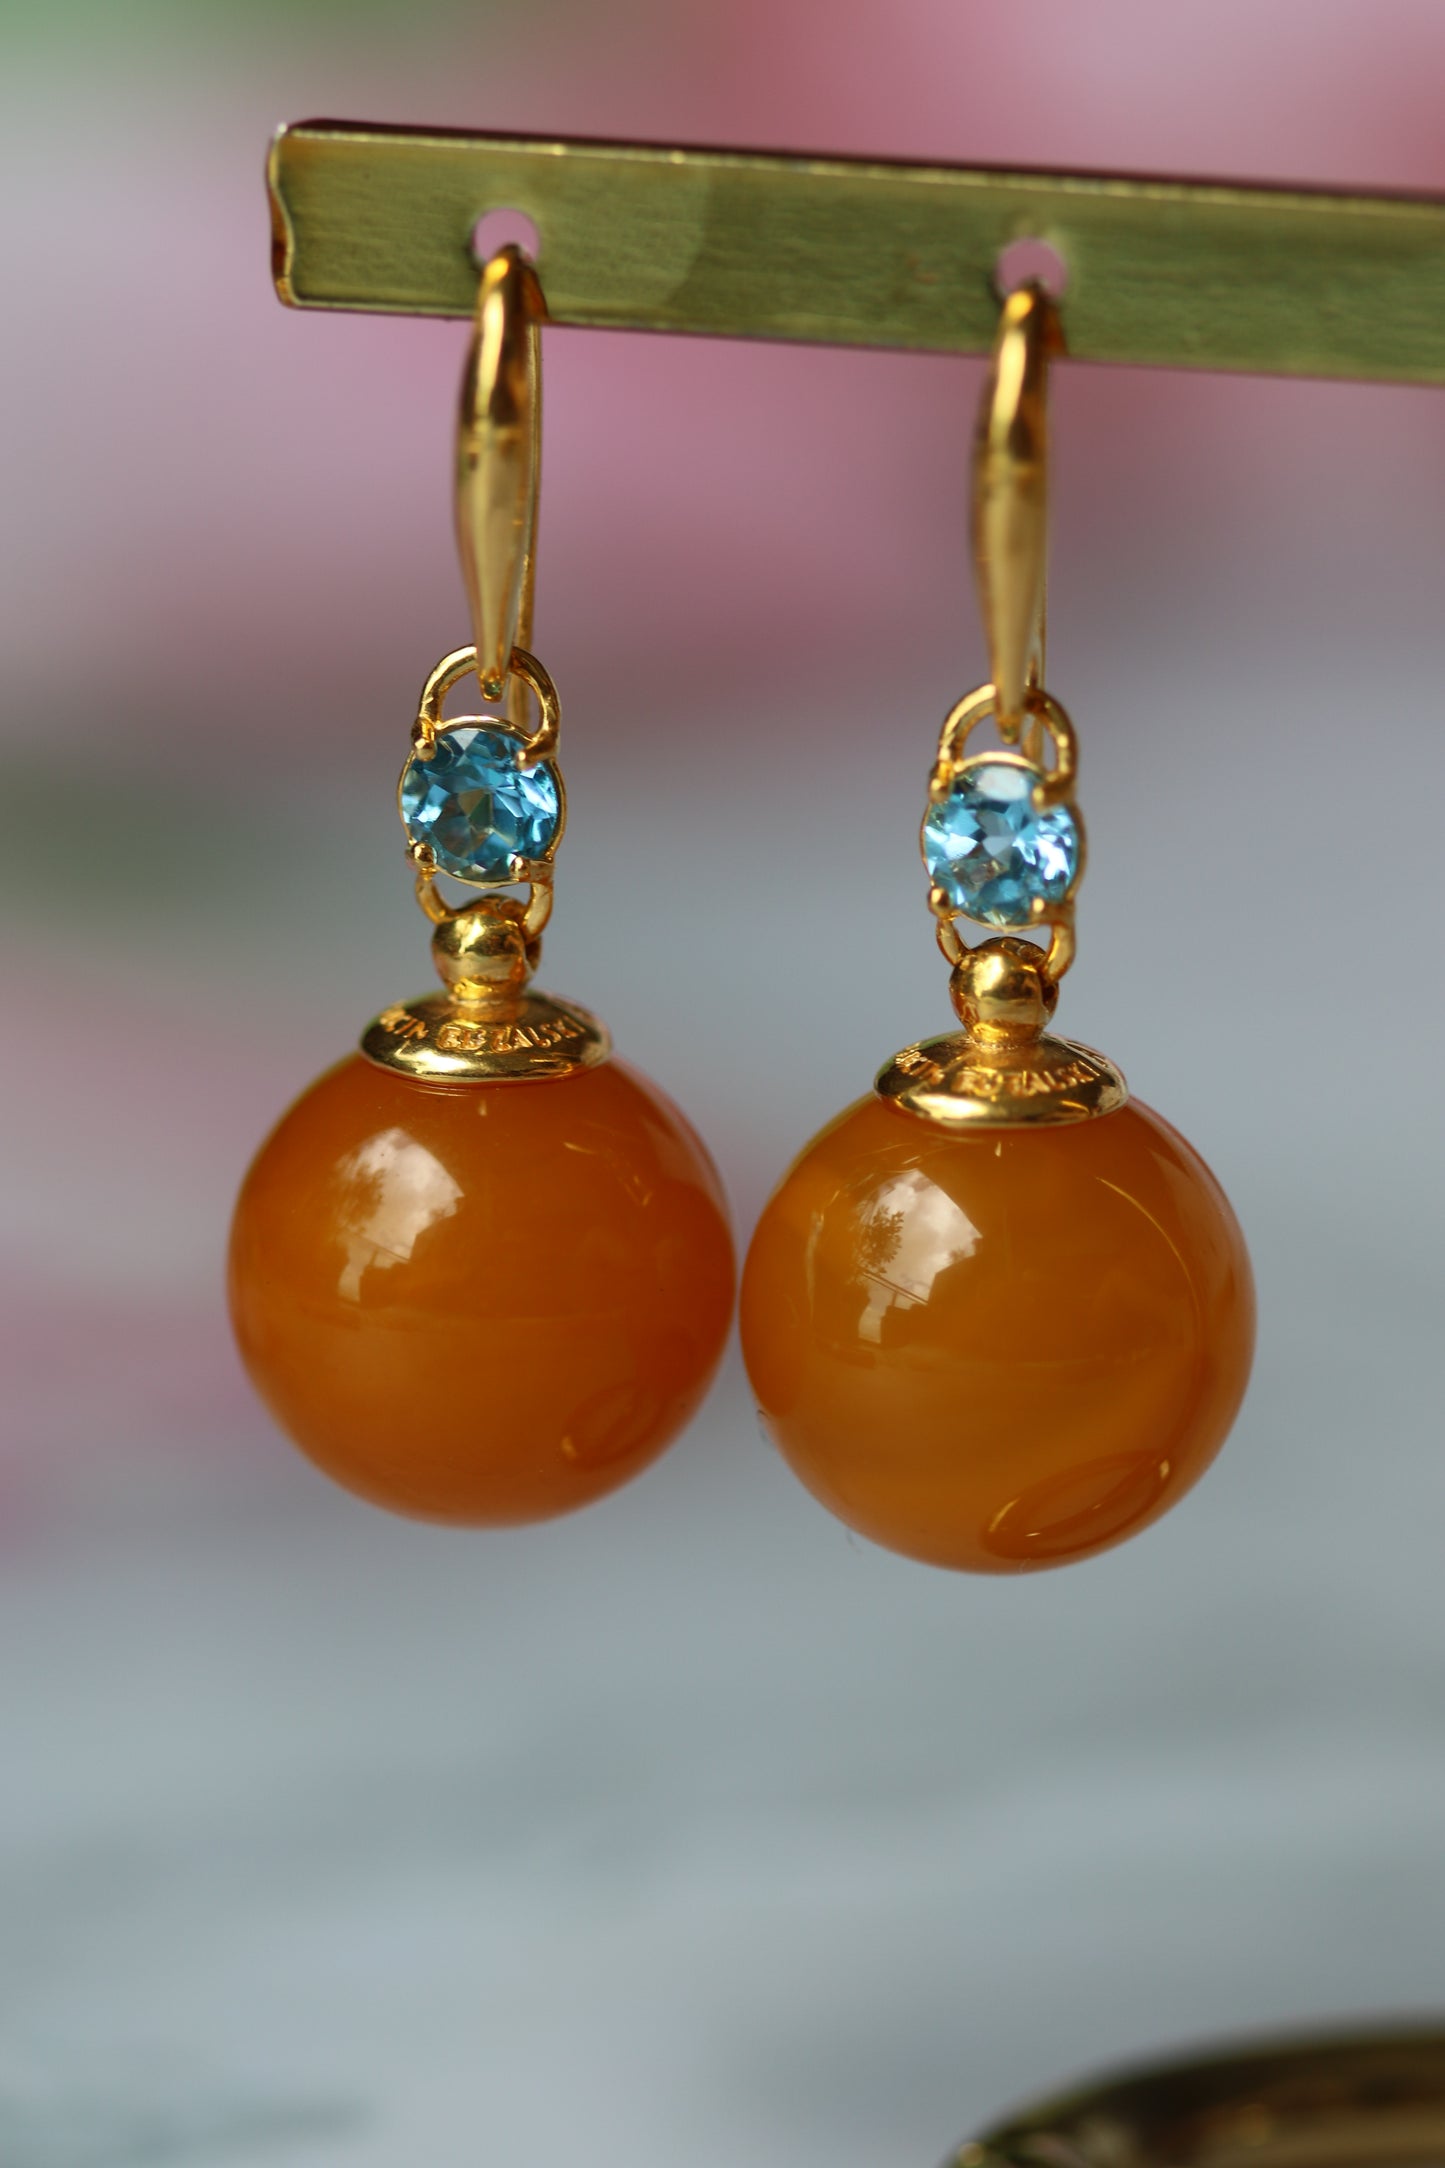 Big Round Old German Dangling Earrings with Faceted Blue Topaz and Gold Plated Silver